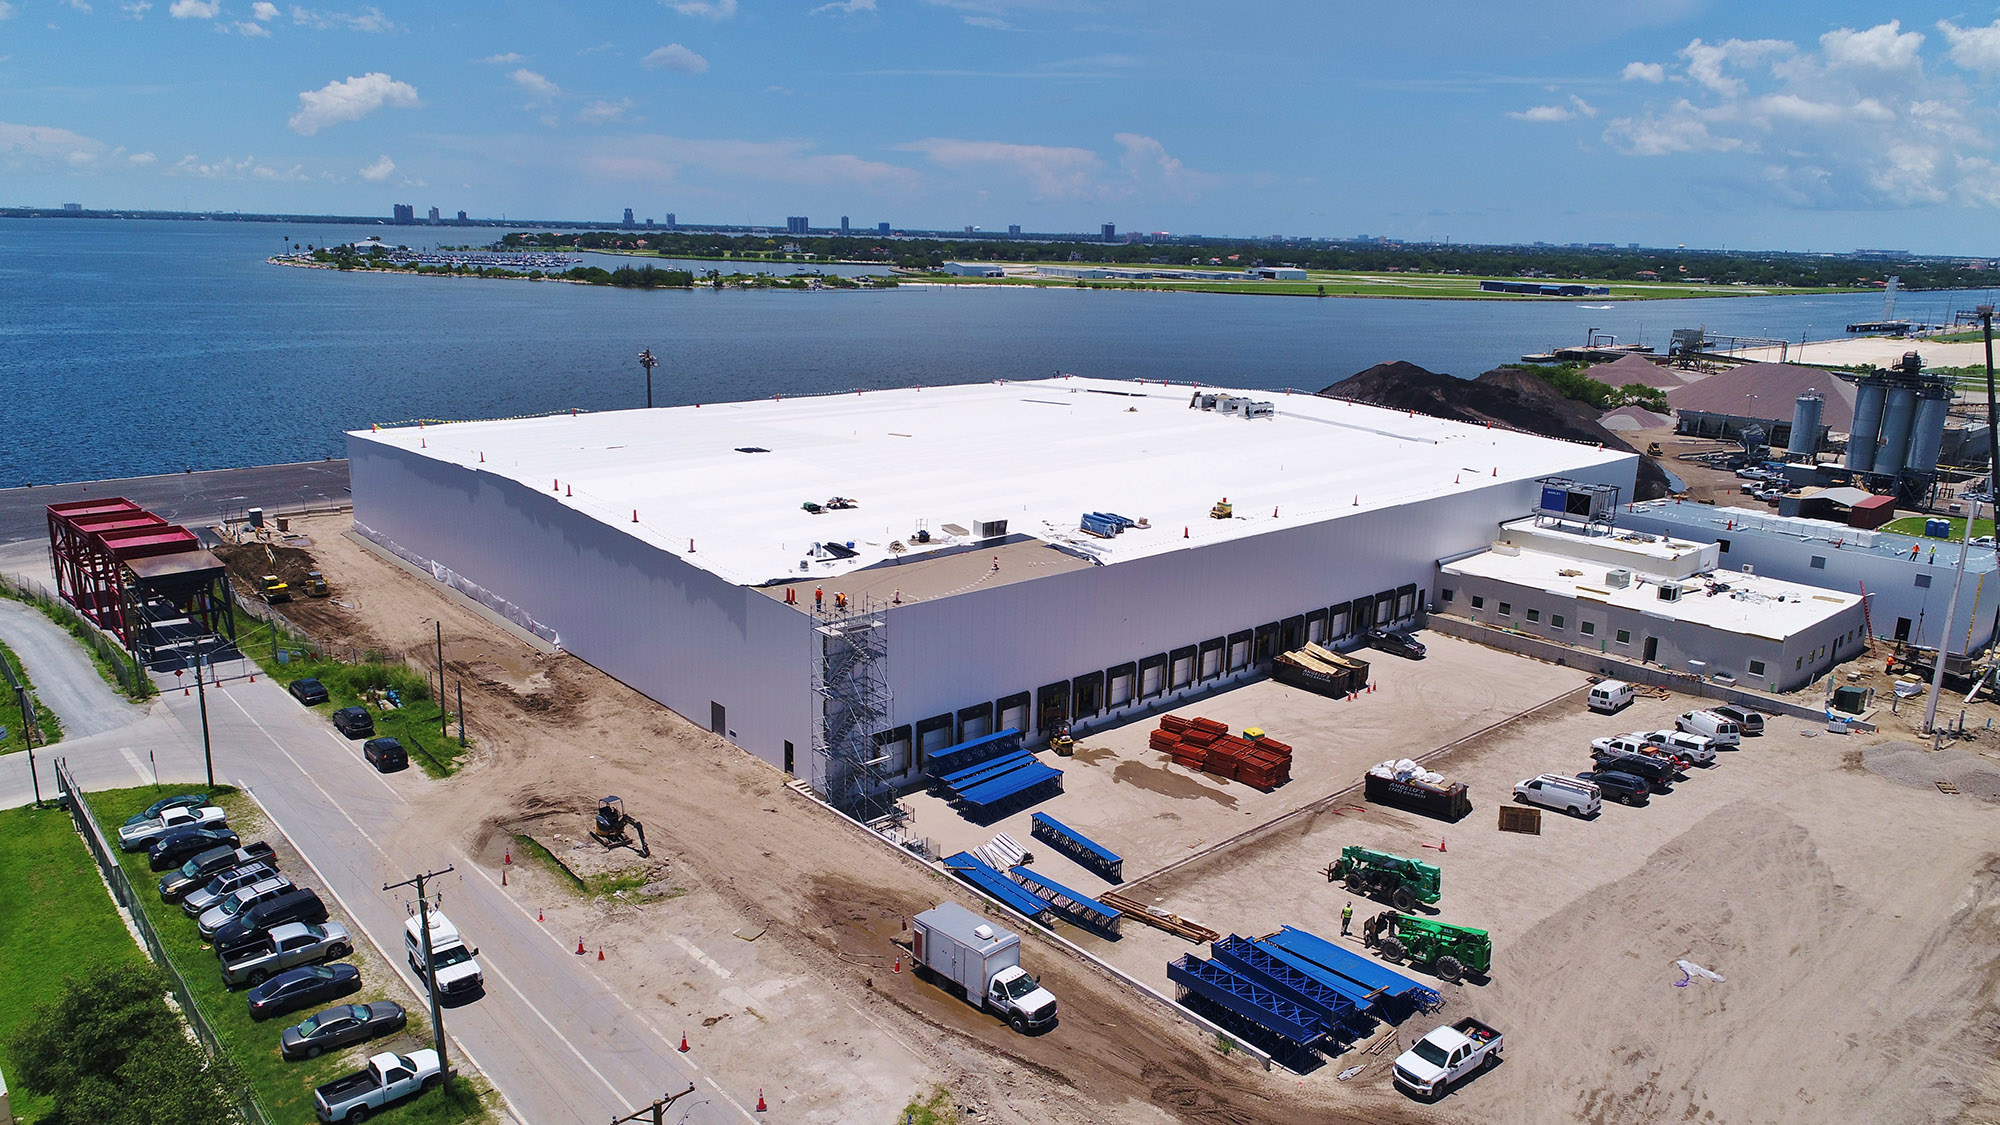 Featured image for “State of the Art Sprinkler System at the Refrigerated Warehouse, Port of Tampa”